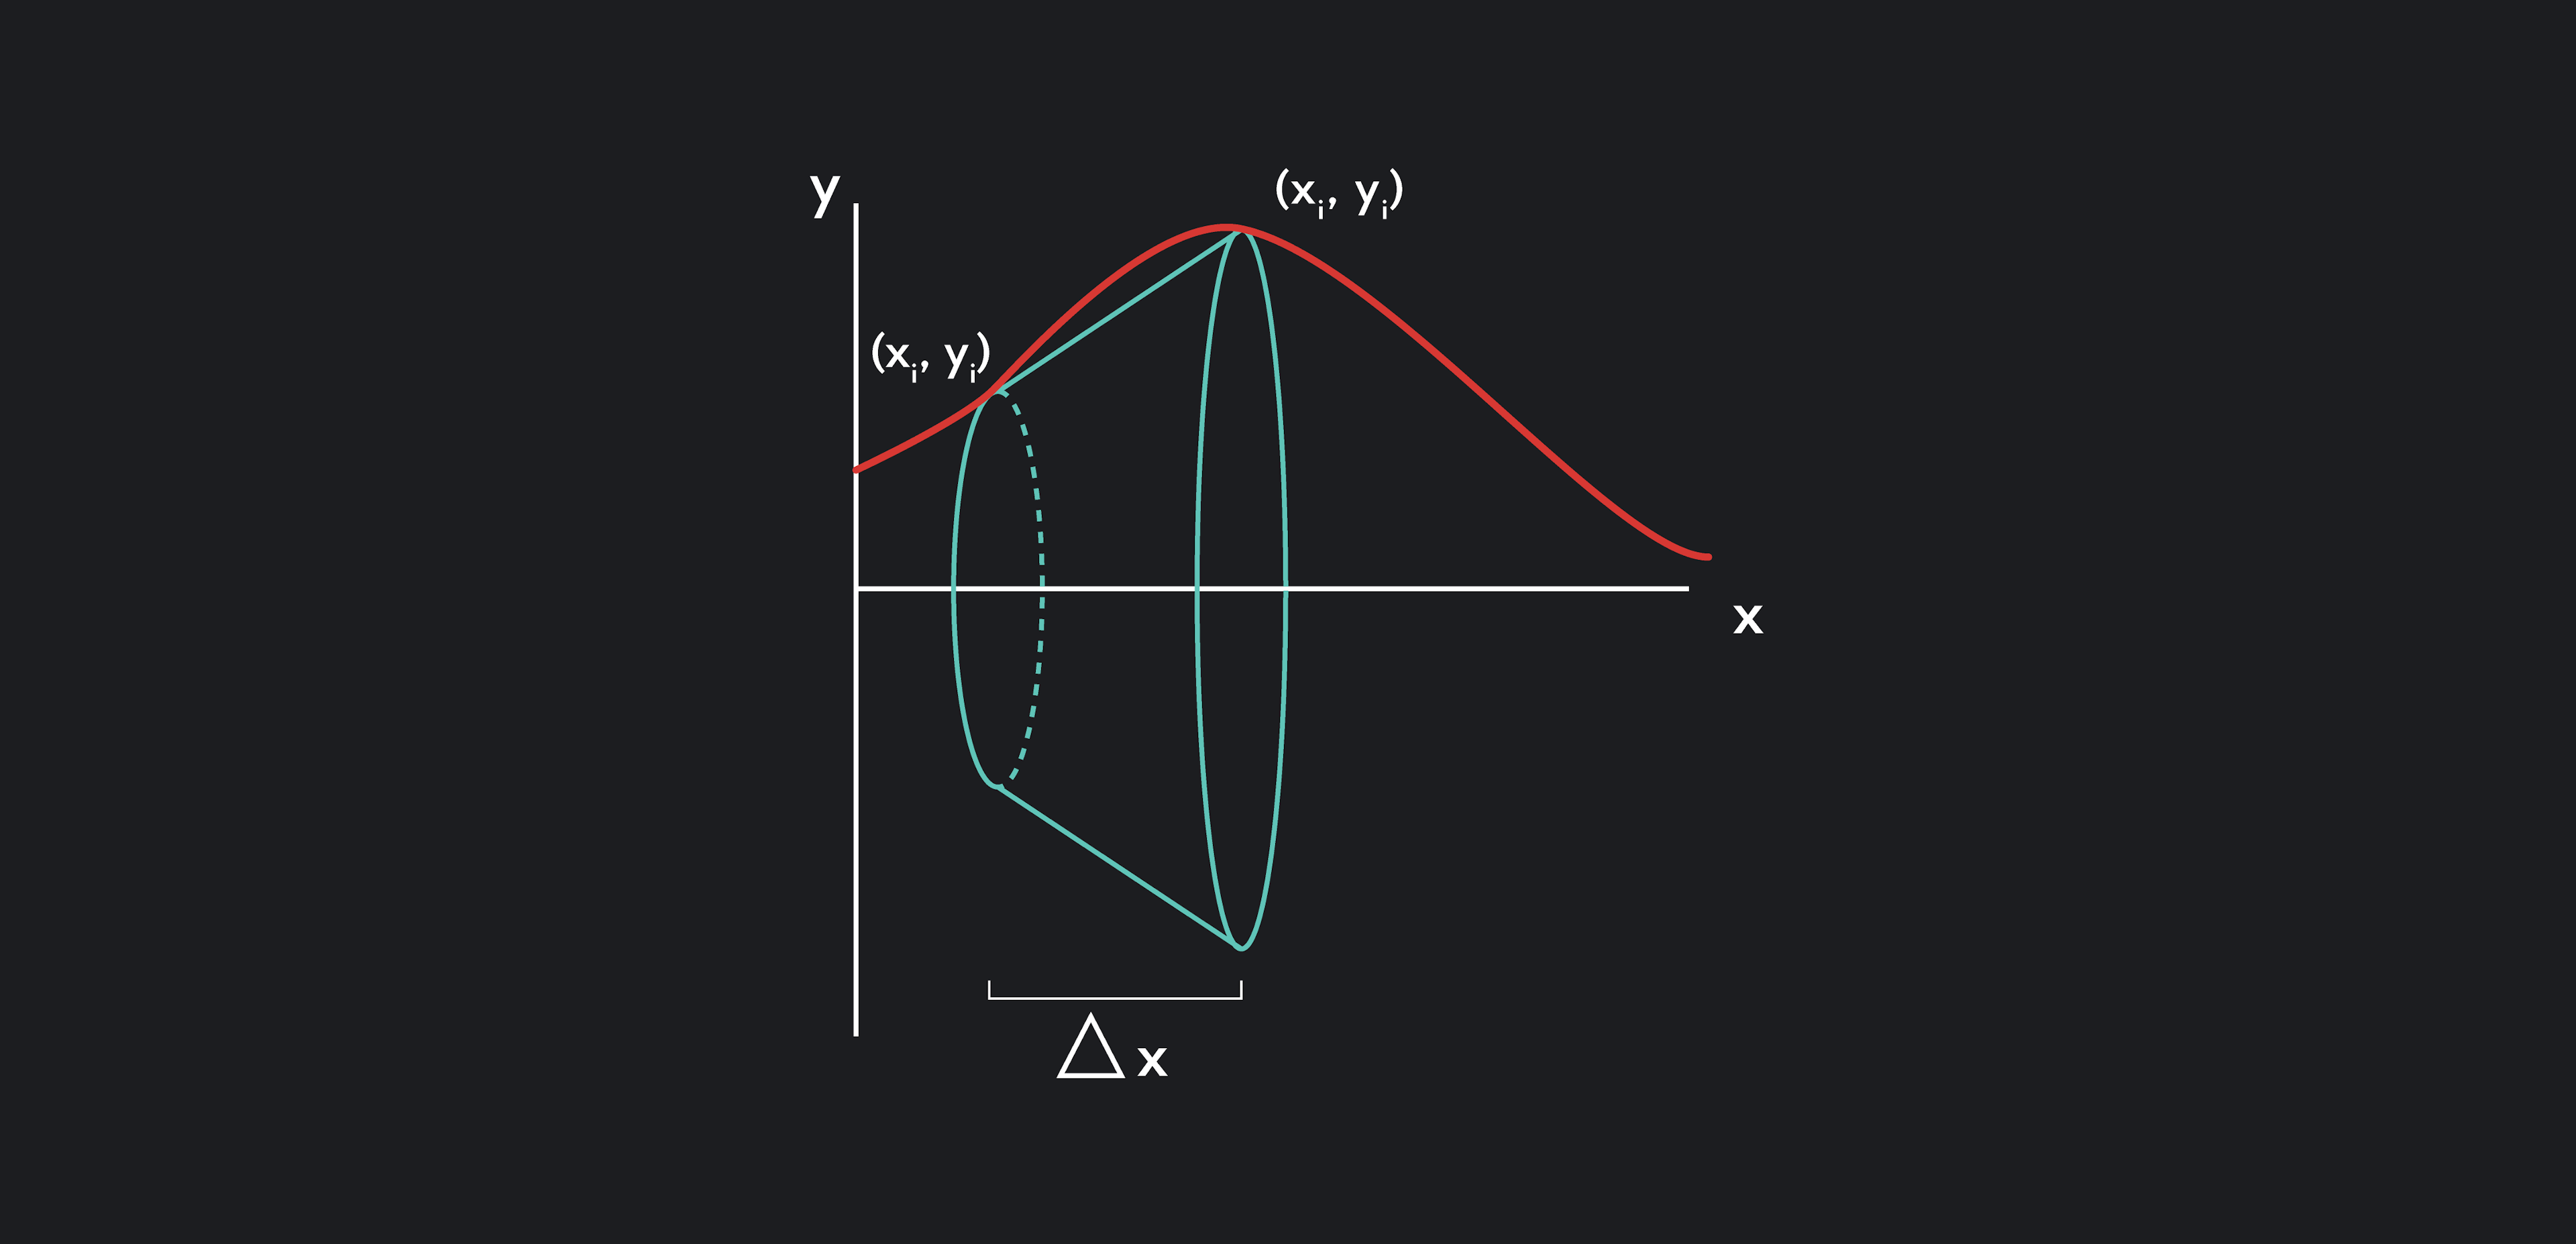 Graph showing an example of a frustum generated by rotating a straight line segment around the x-axis